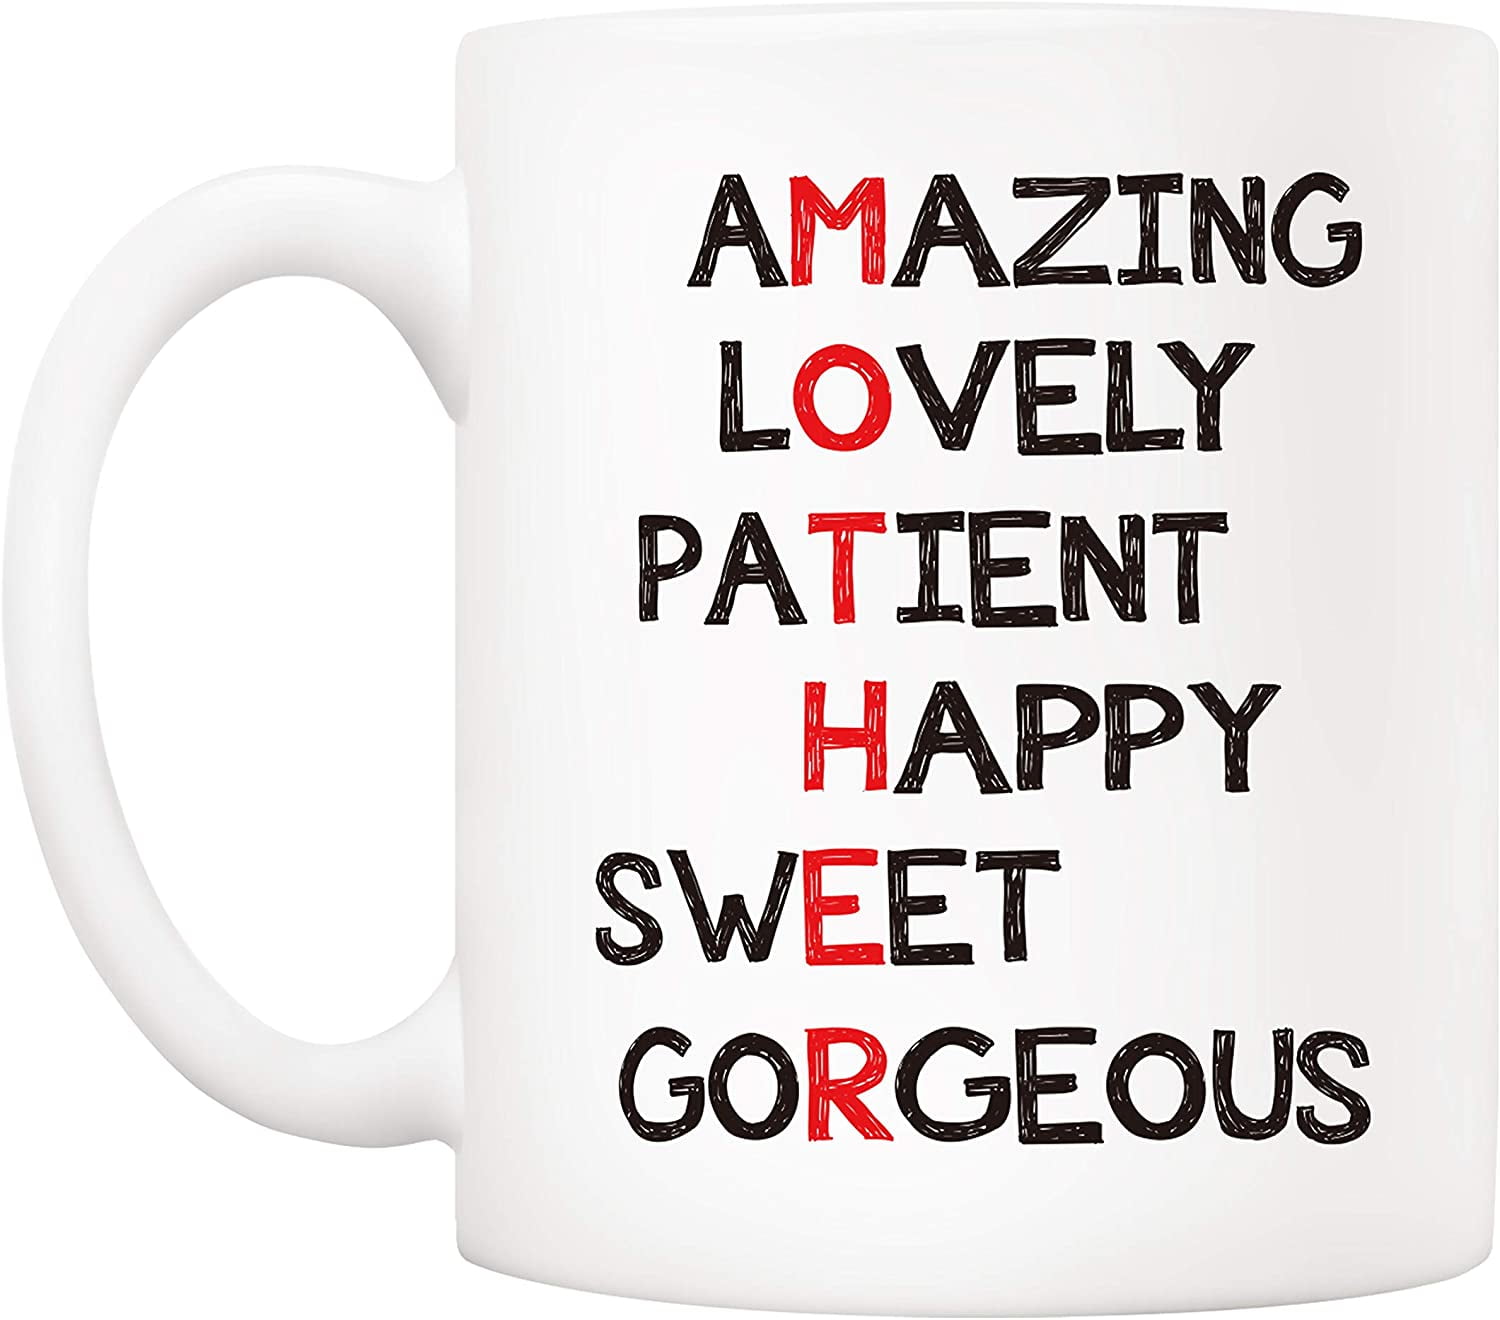 Mother's Day Gifts Mom Definition Funny Coffee Mug, Christmas or